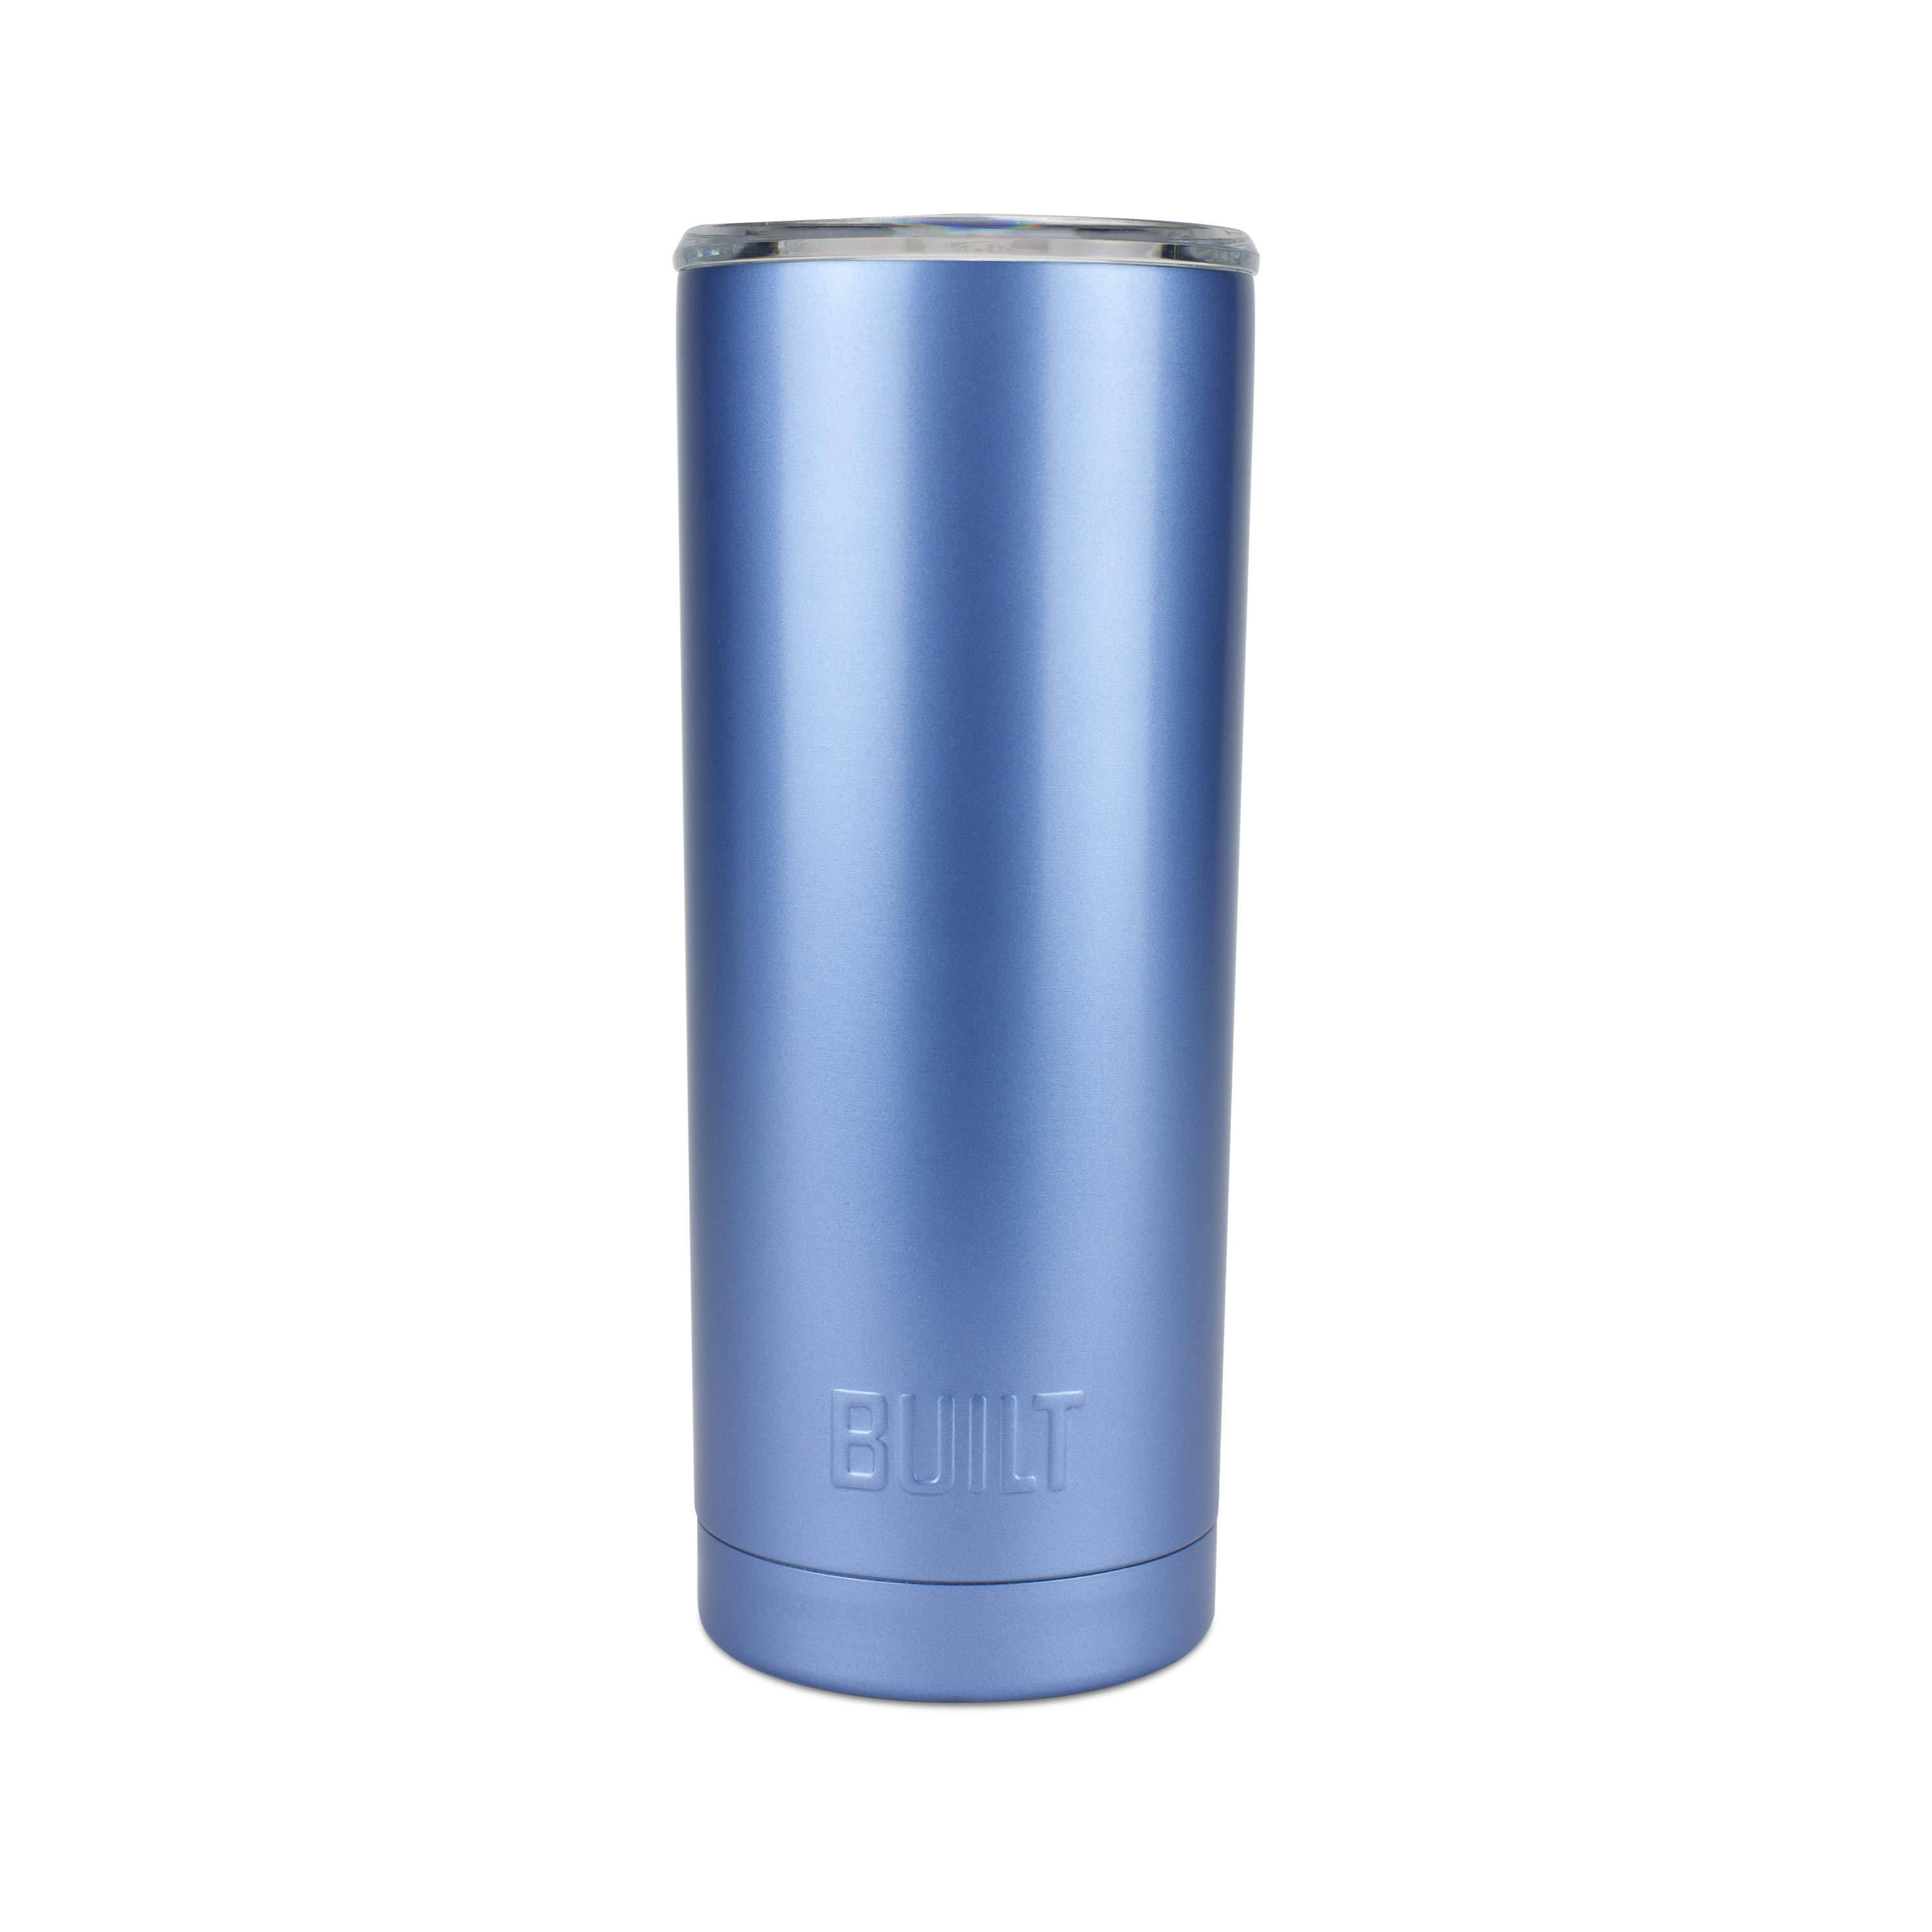 Built 20-Ounce Double-Wall Stainless Steel Tumbler in Blue - image 1 of 14